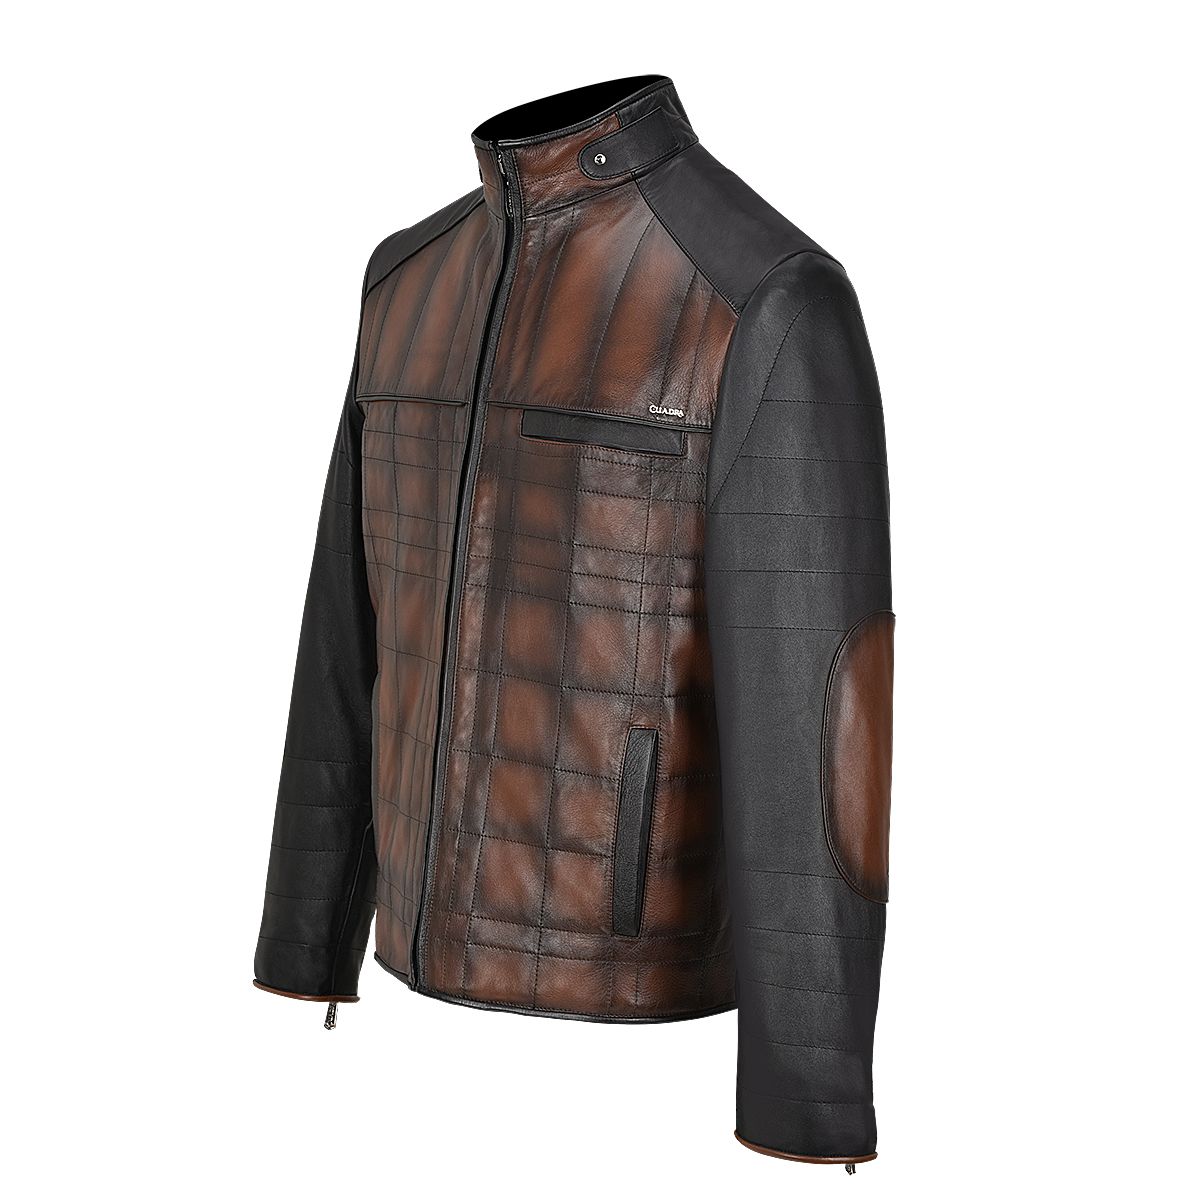 H308COB - Cuadra brown casual fashion goat leather jacket for men-Kuet.us